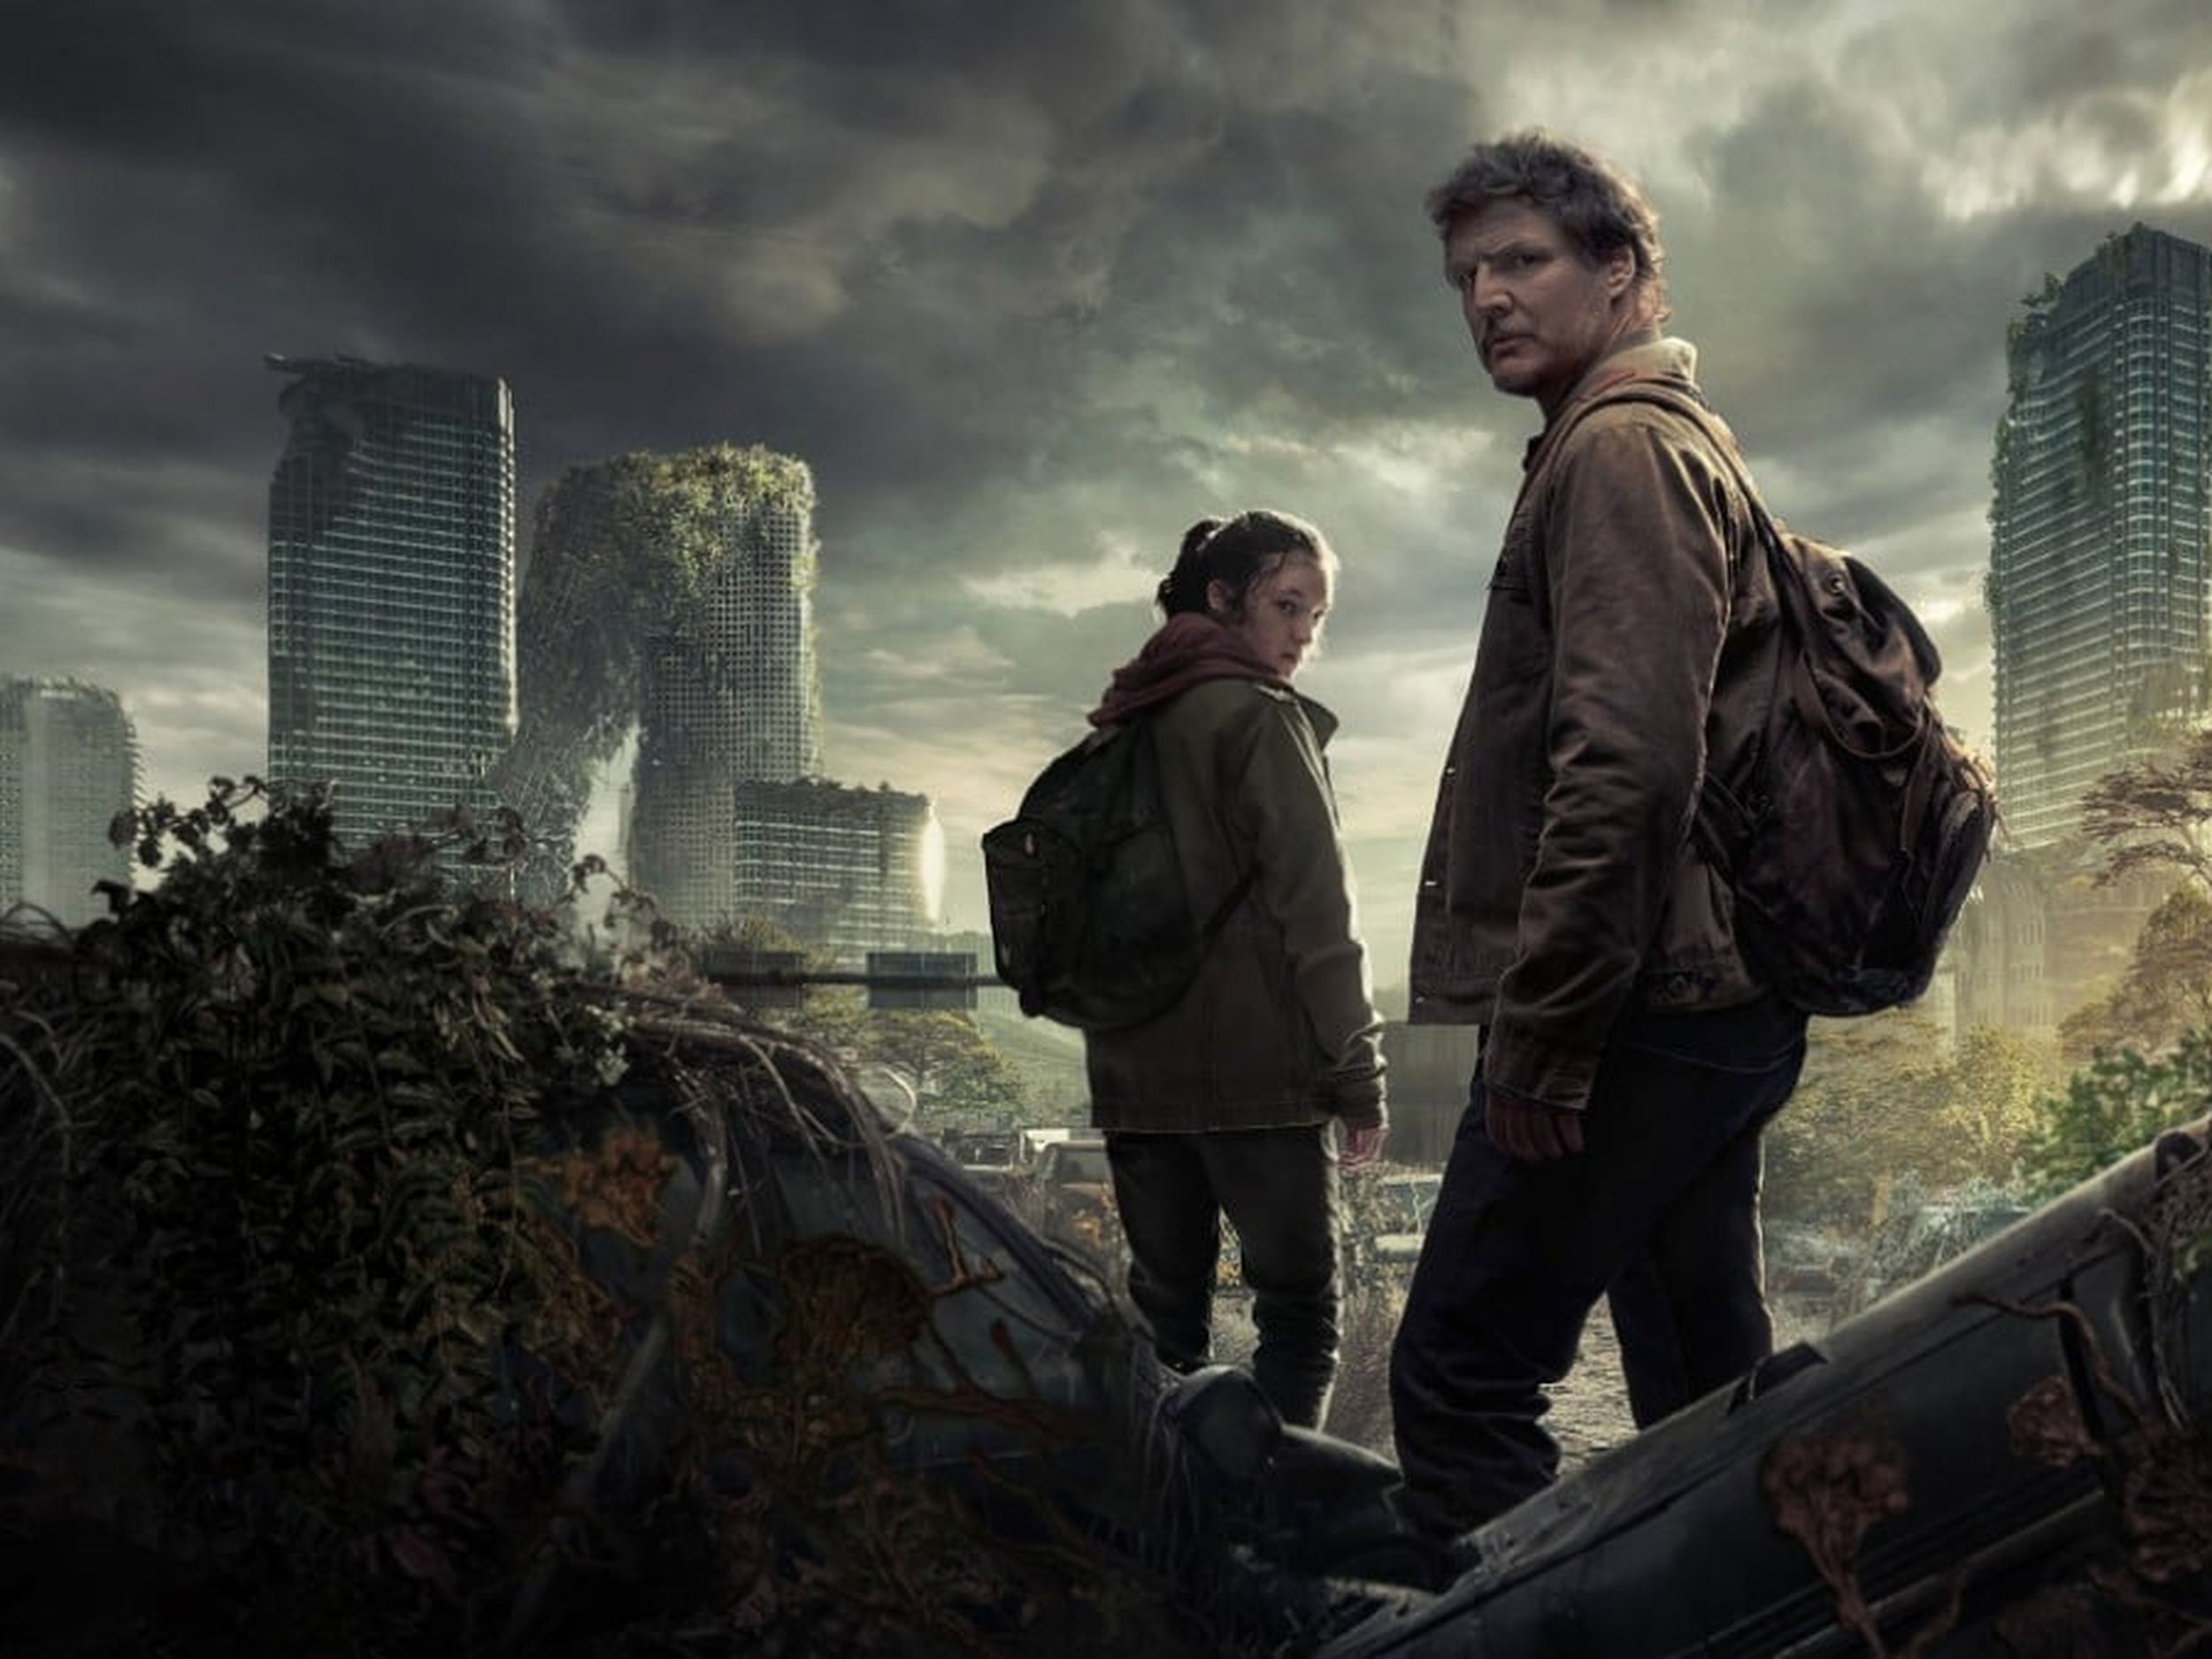 Opinion: HBO's “The Last of Us” Is a Faithful Adaptation of the